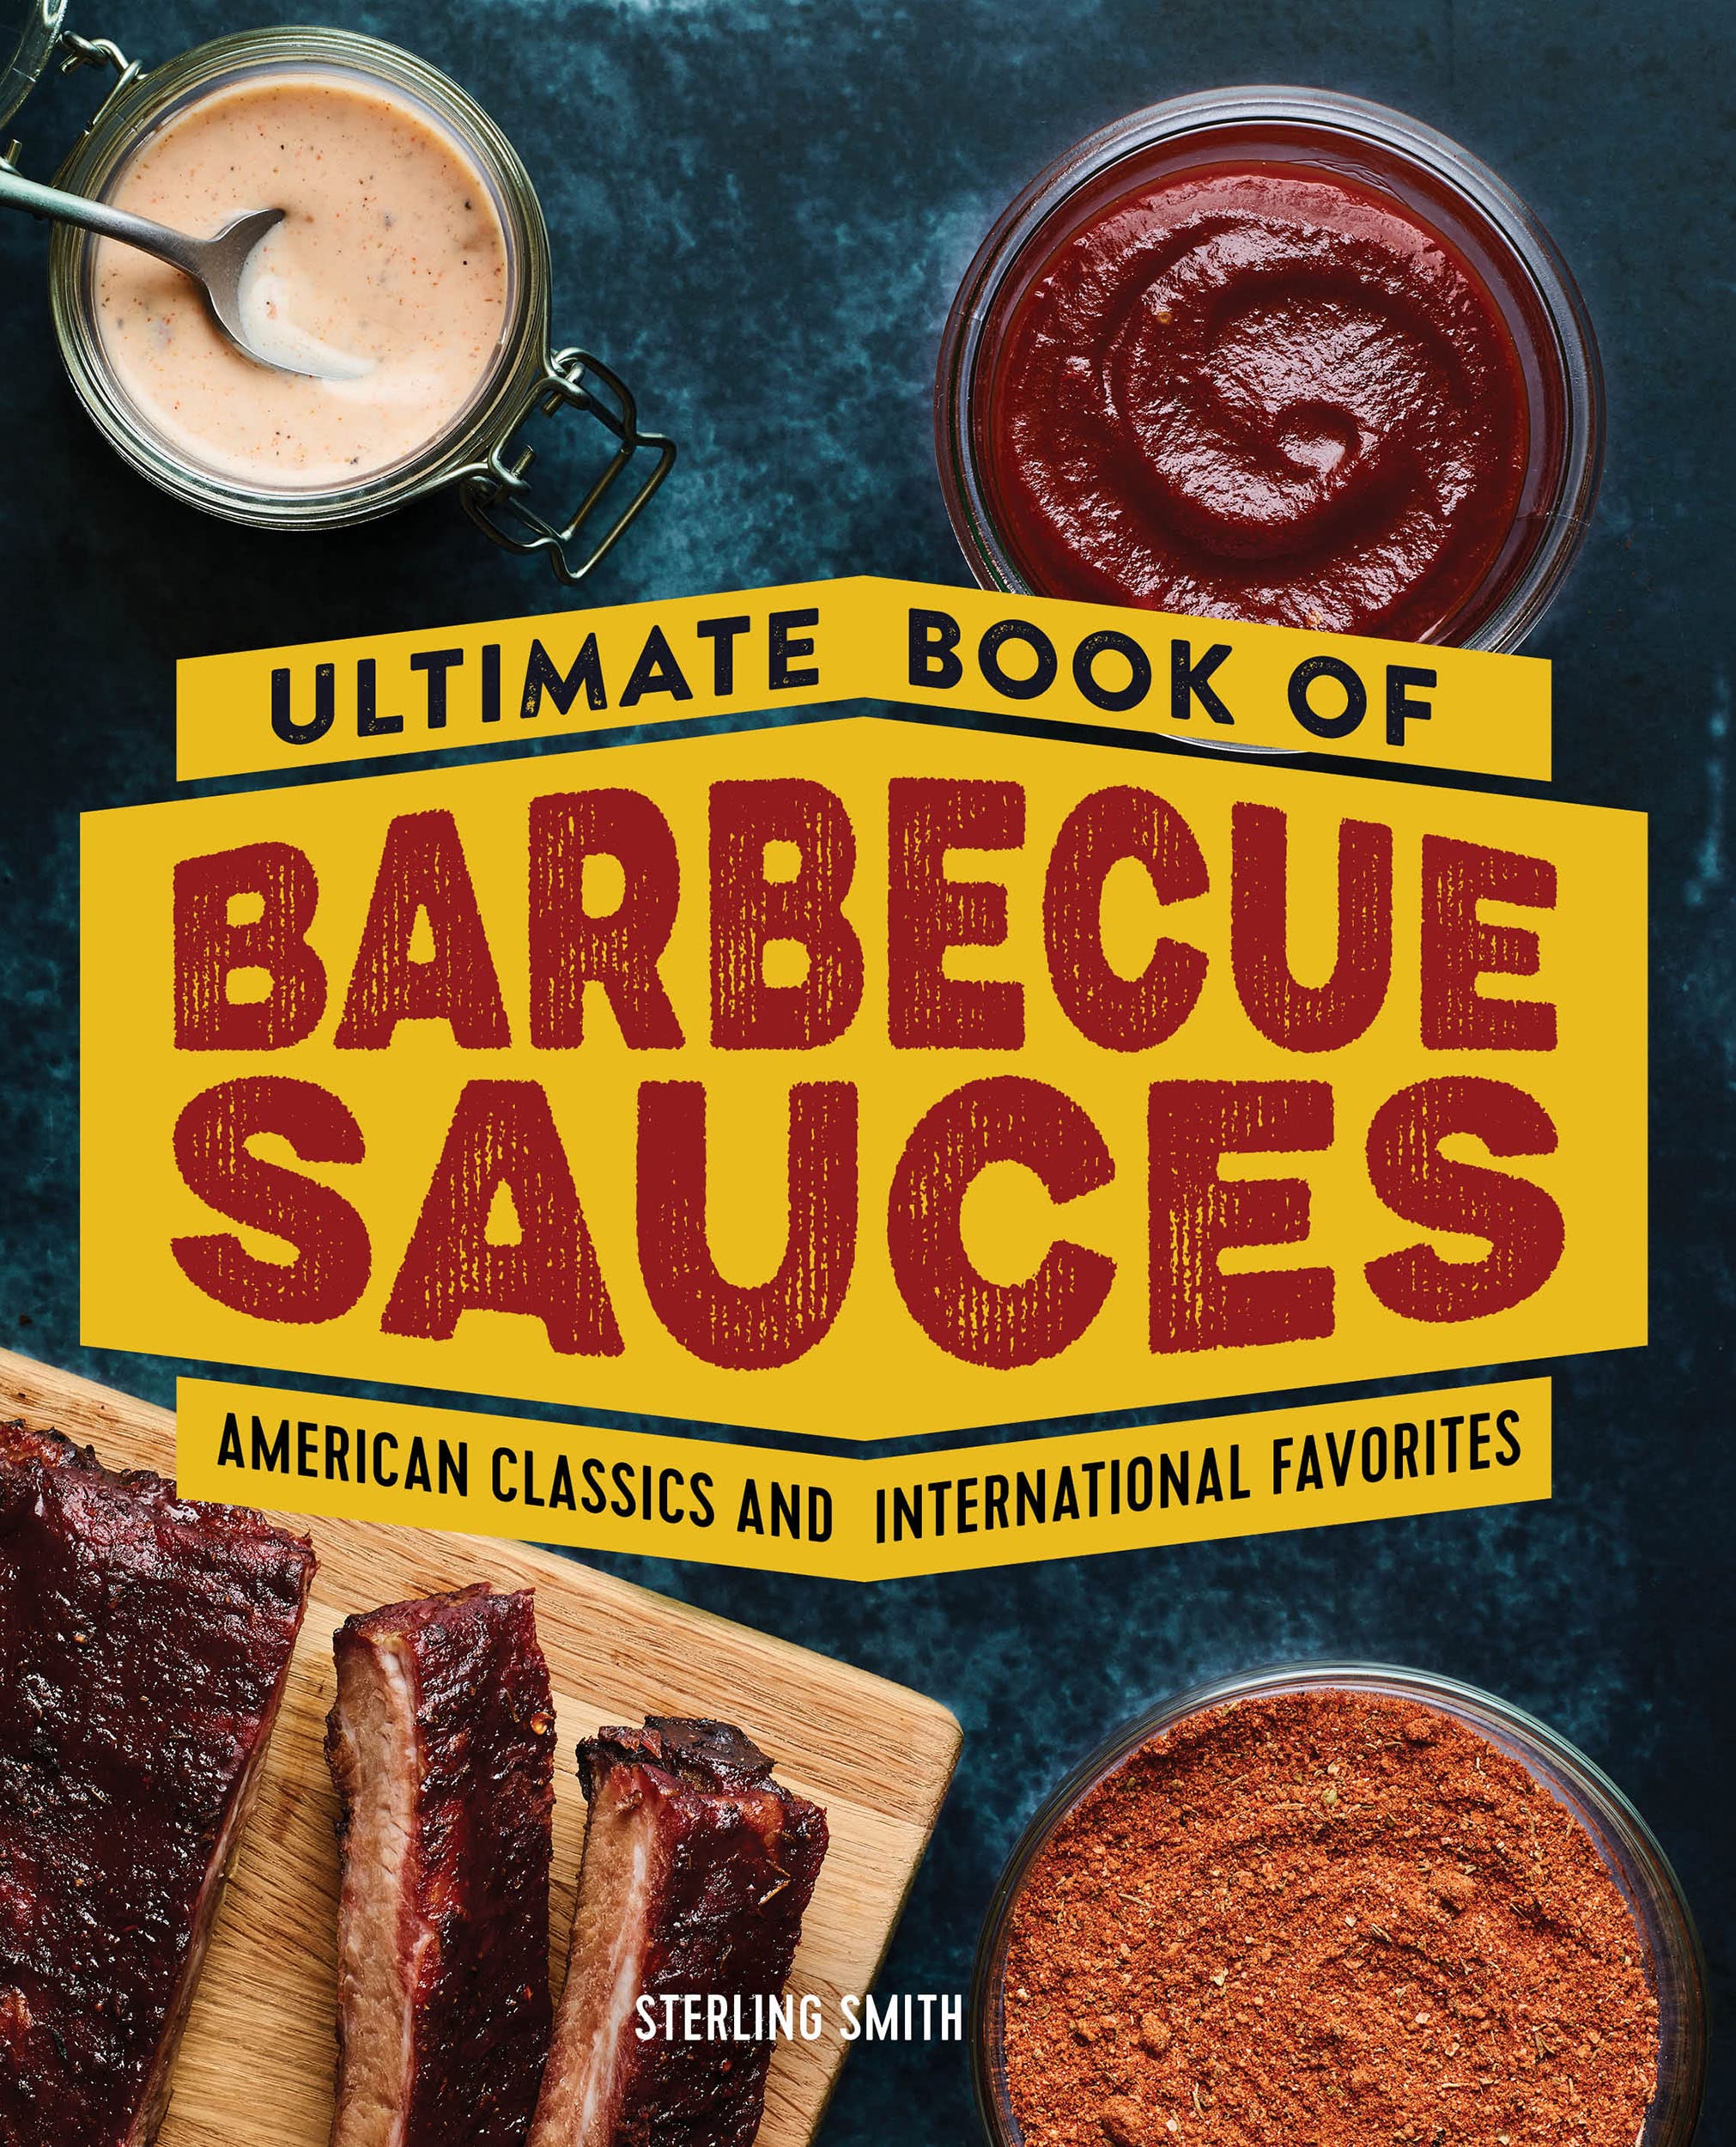 The Ultimate Book of Barbecue Sauces: American Classics and International Favorites (Sterling Smith)